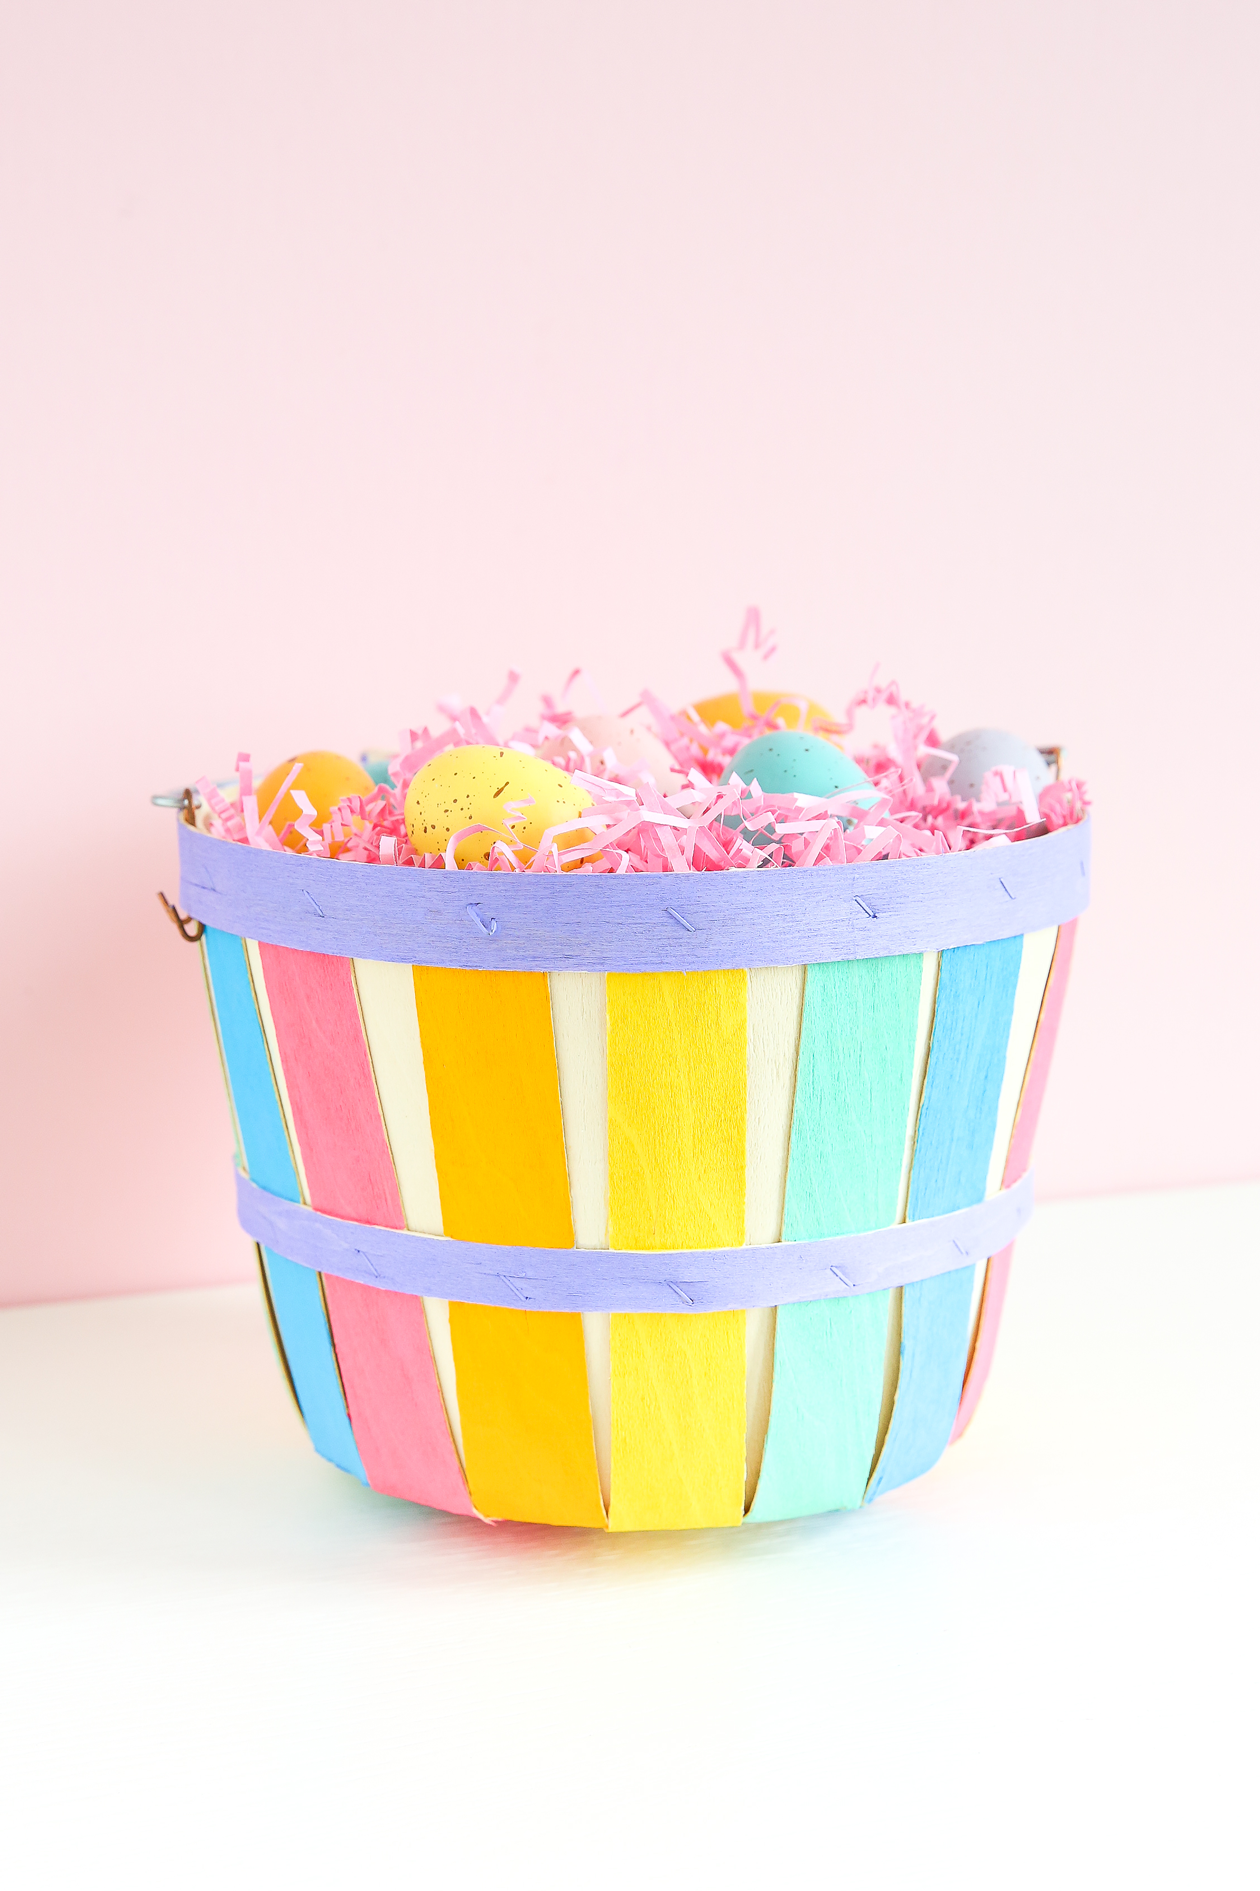 Add a colorful, handmade touch to your spring decor with this DIY Painted Easter Basket! Make your own custom Easter Basket with your kids or for yourself!